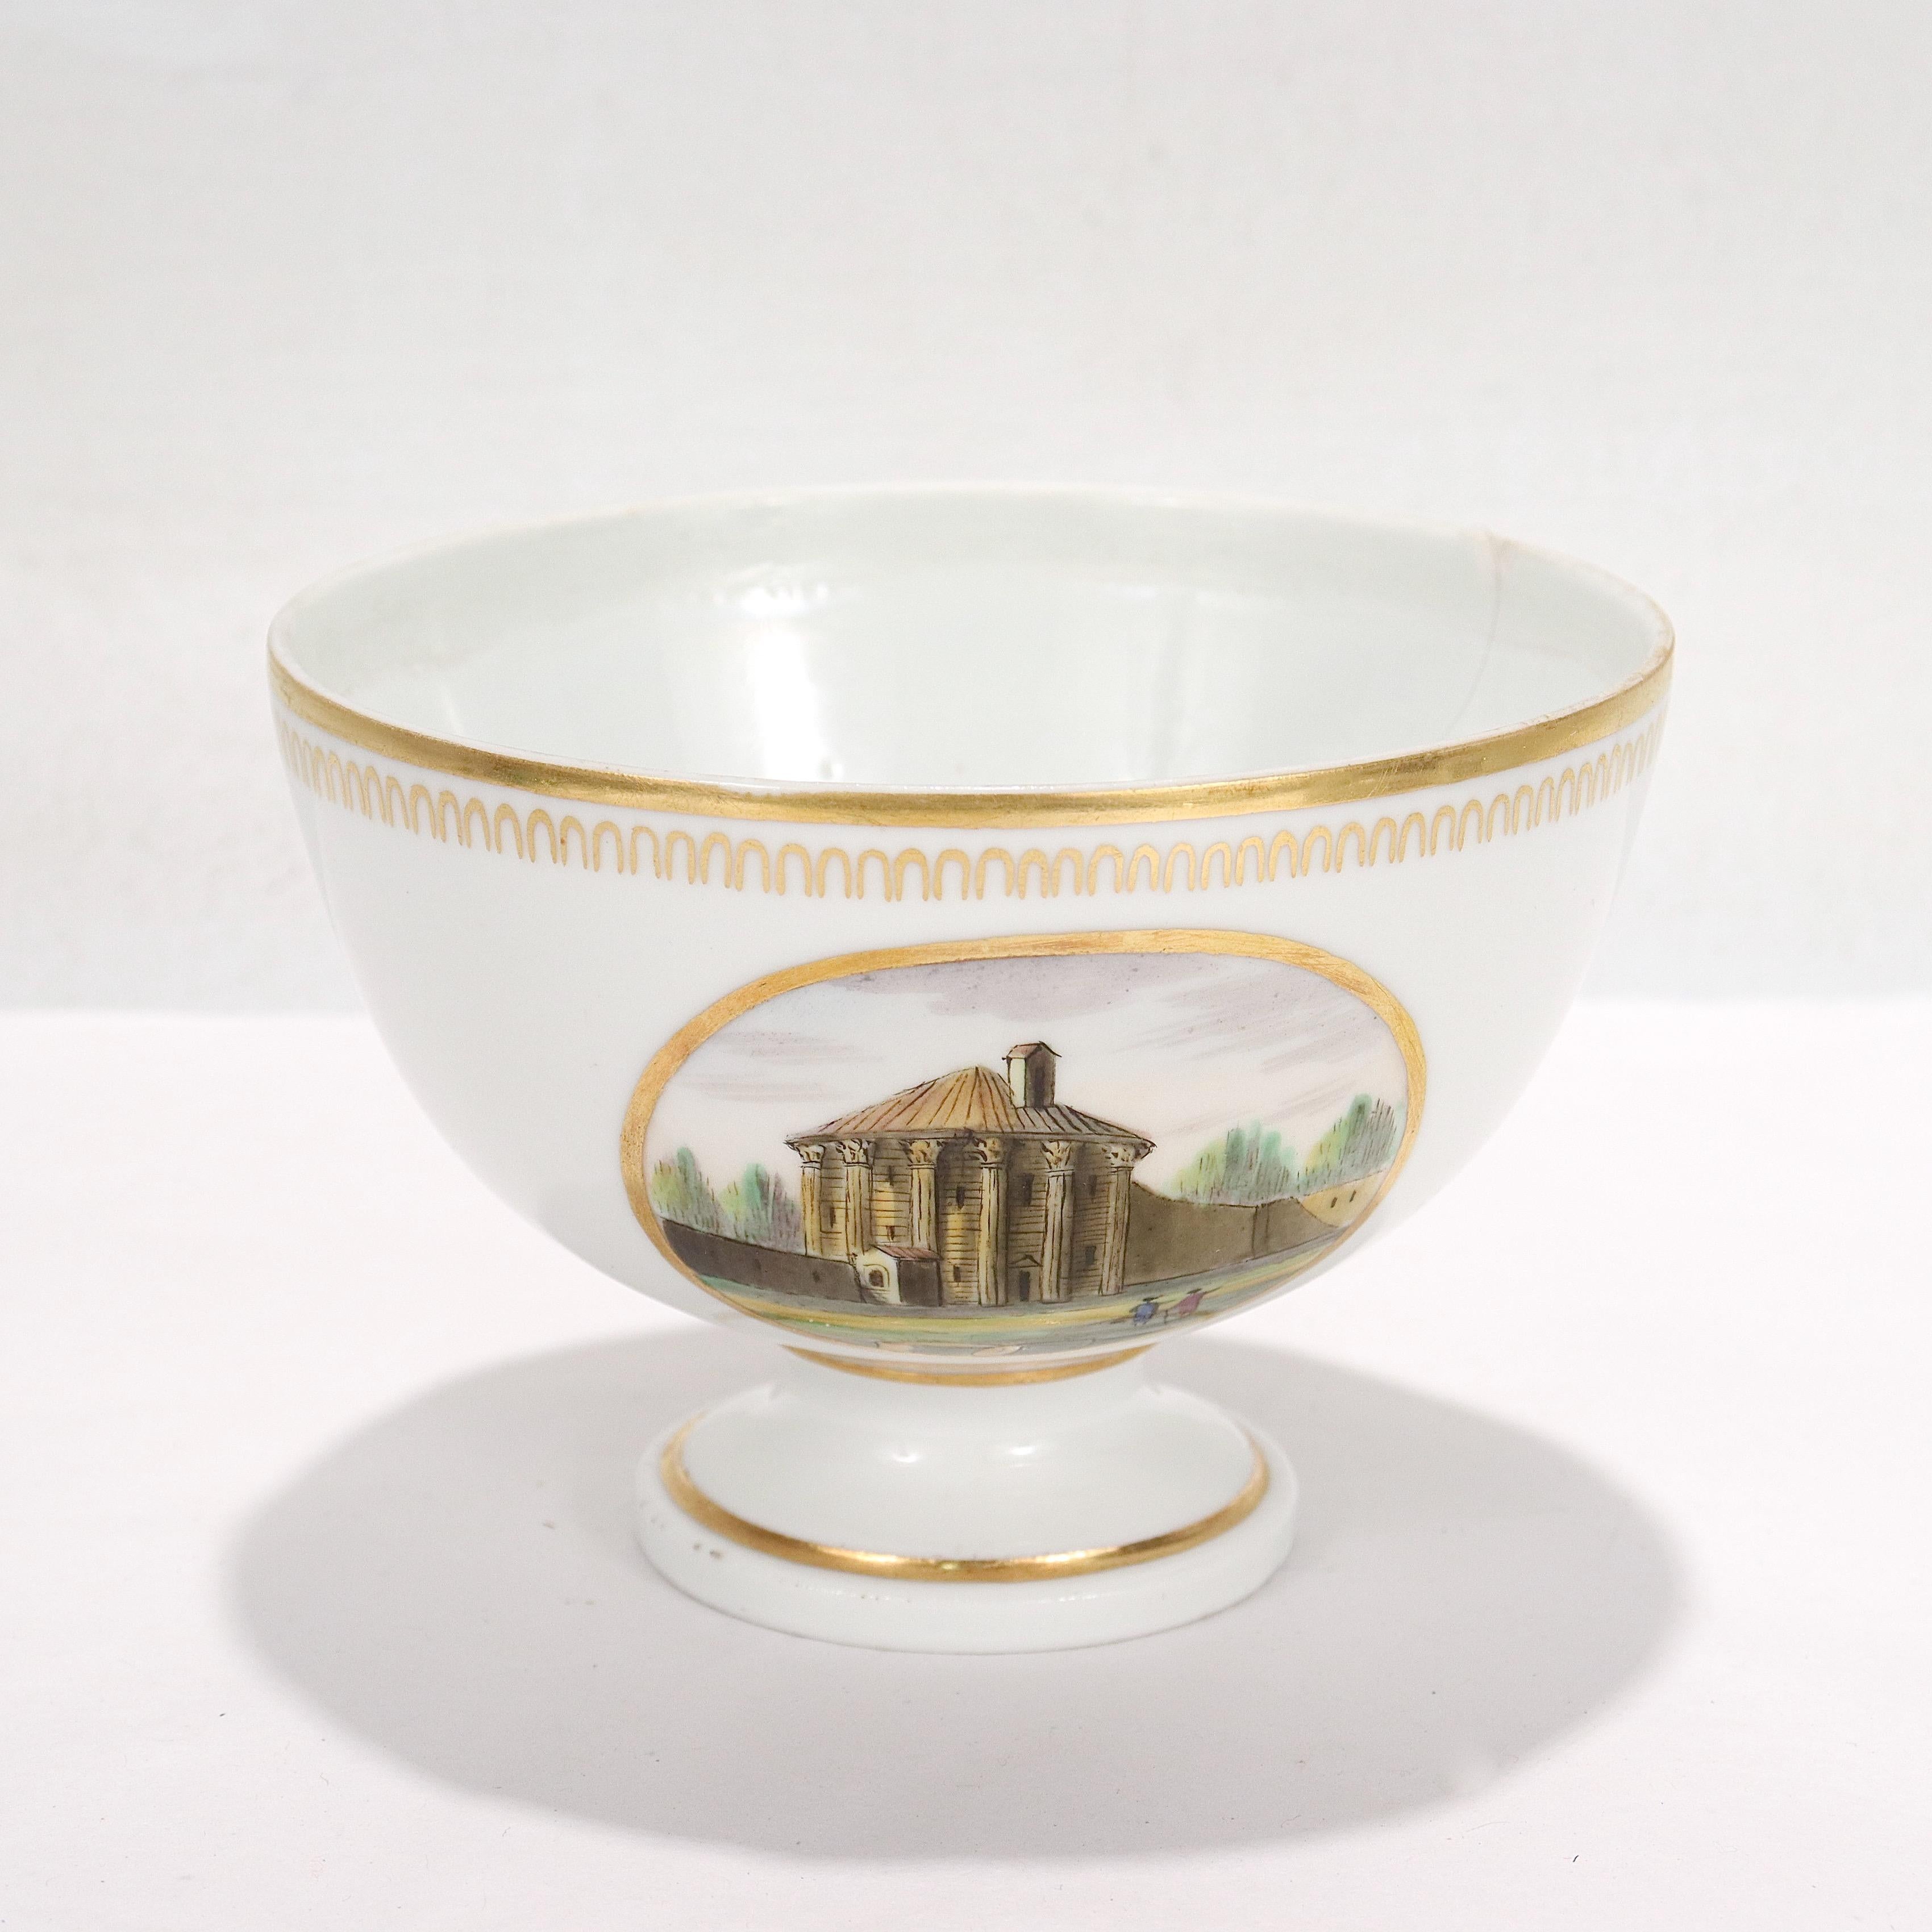 A fine antique topographical porcelain waste bowl.

By Doccia porcelain manufactory circa 1820.

With painted enamel topographical scenes, one different to each side.

Decorated in polychrome enamels and gilt borders in the neoclassical